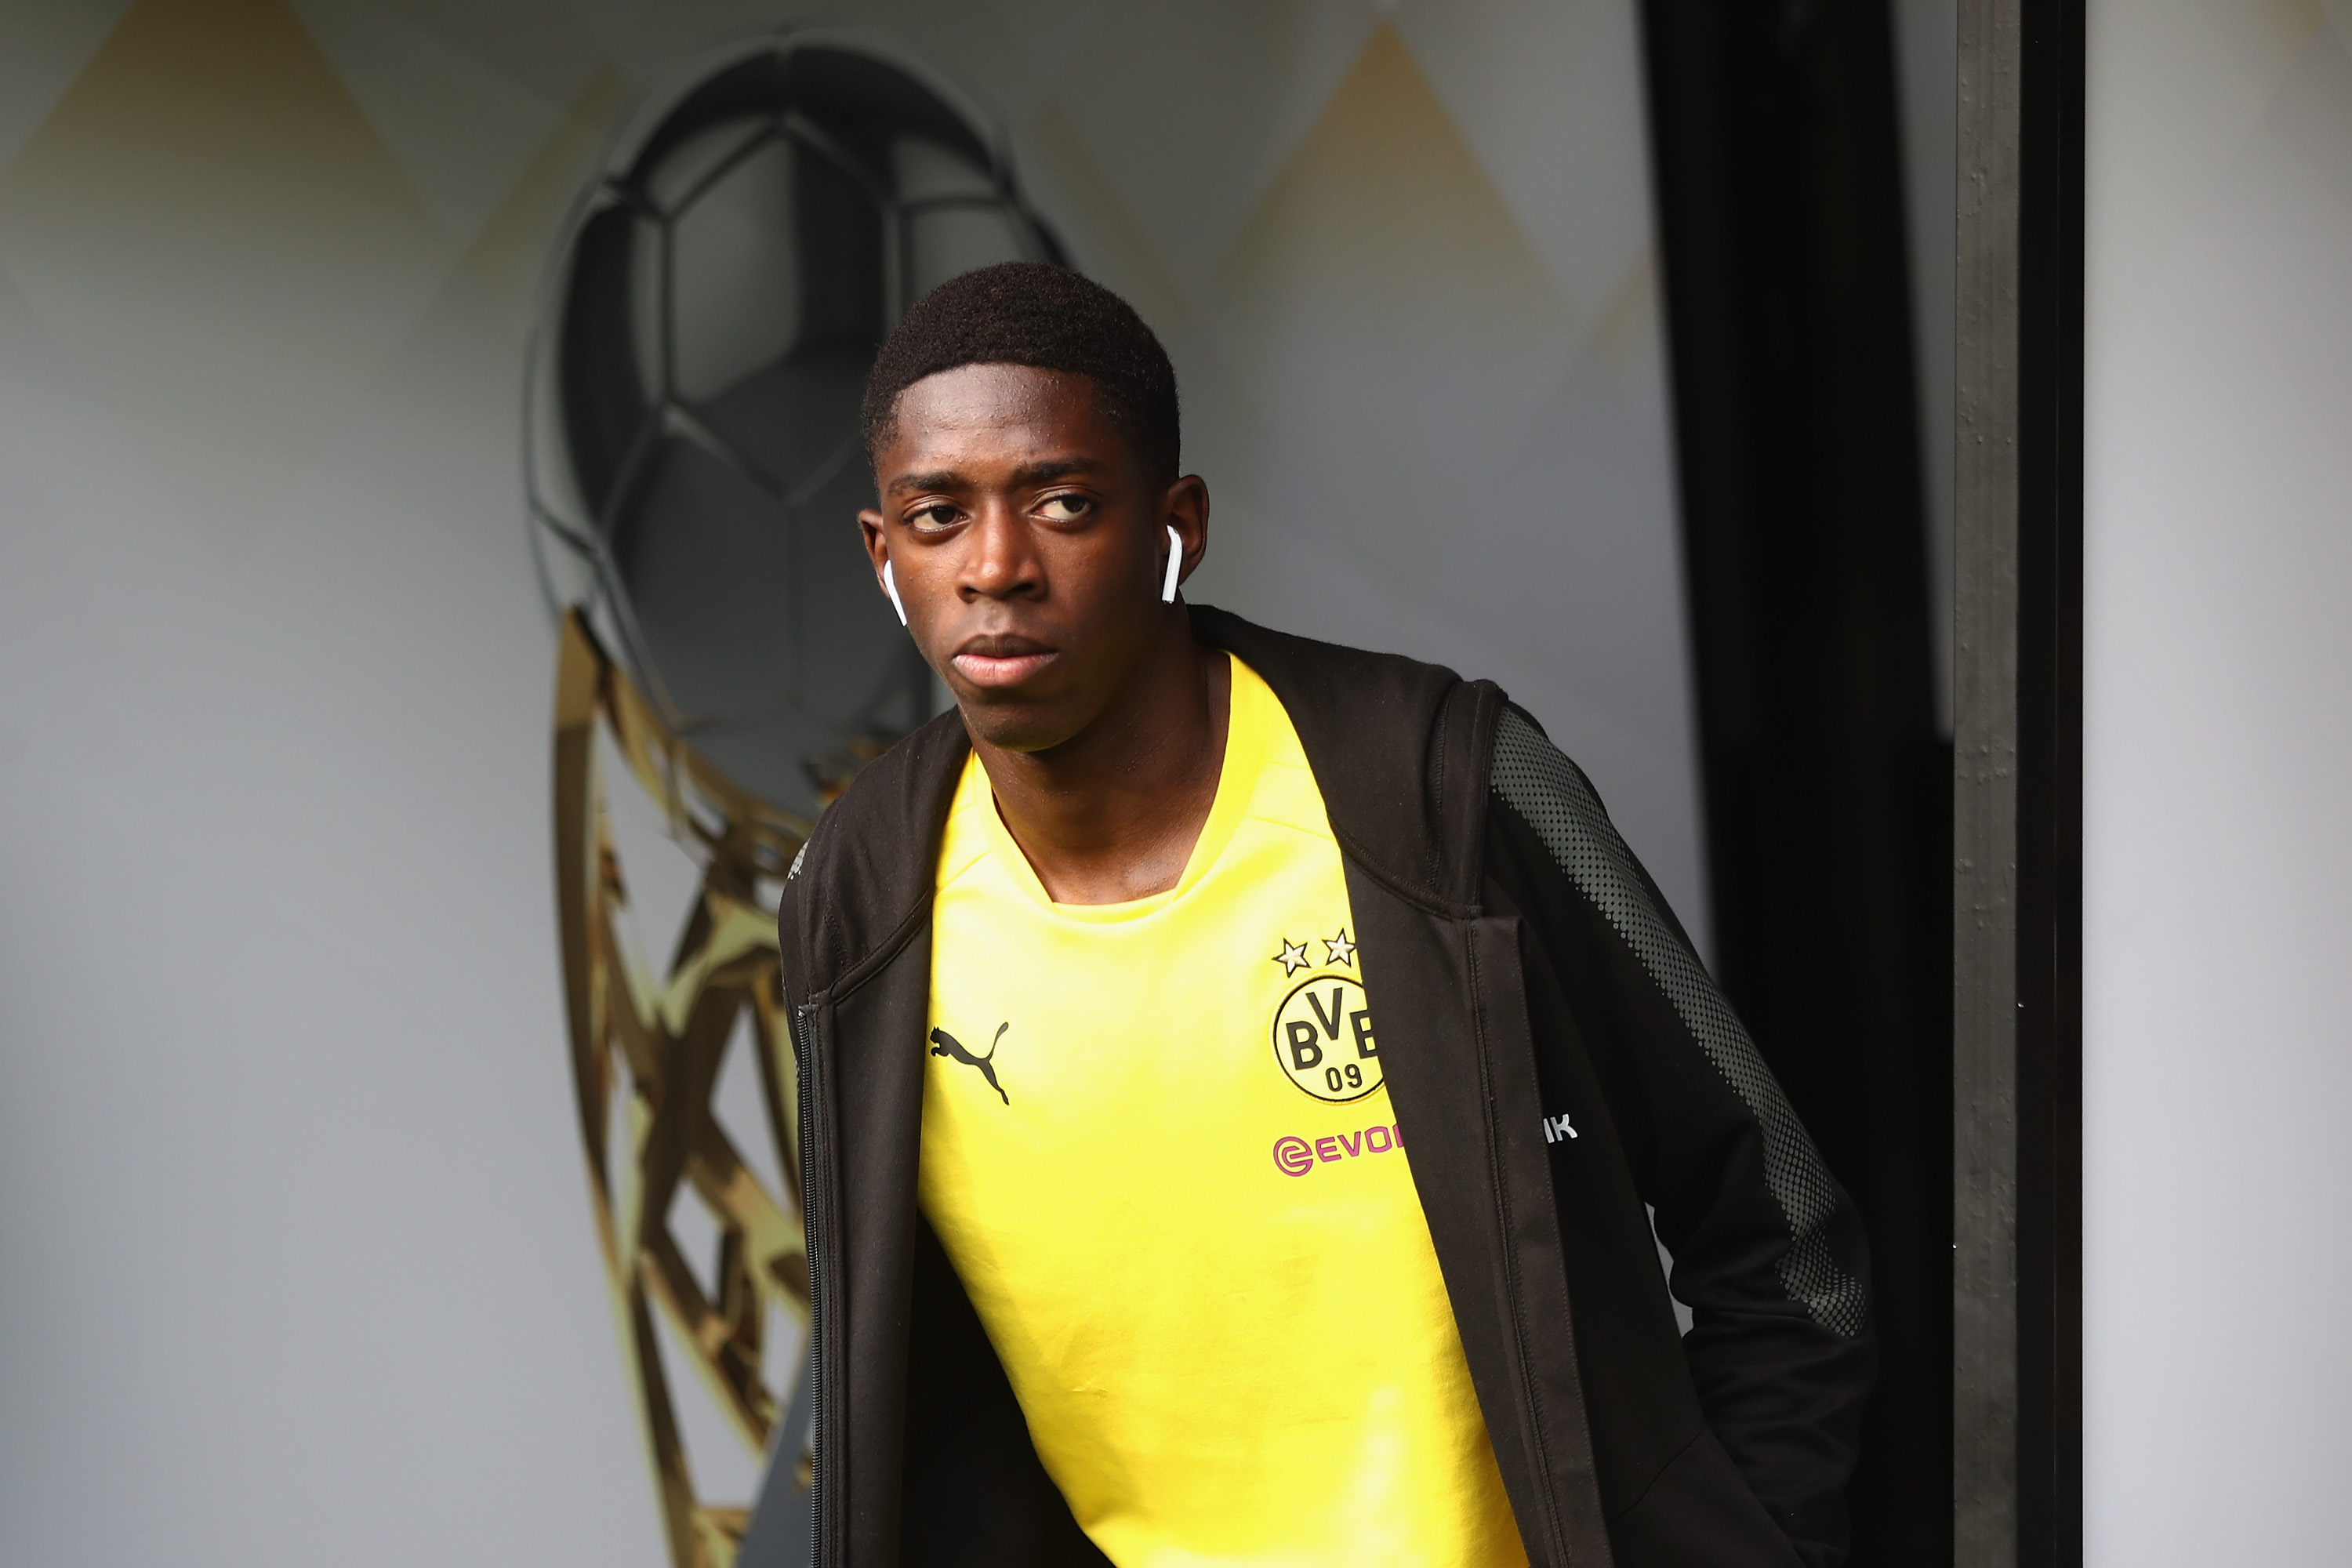 DORTMUND, GERMANY - AUGUST 05:  Ousmane Dembele of Dortmund walks out of the tunnel prior to the DFL Supercup 2017 match between Borussia Dortmund and Bayern Muenchen at Signal Iduna Park on August 5, 2017 in Dortmund, Germany.  (Photo by Alex Grimm/Bongarts/Getty Images )